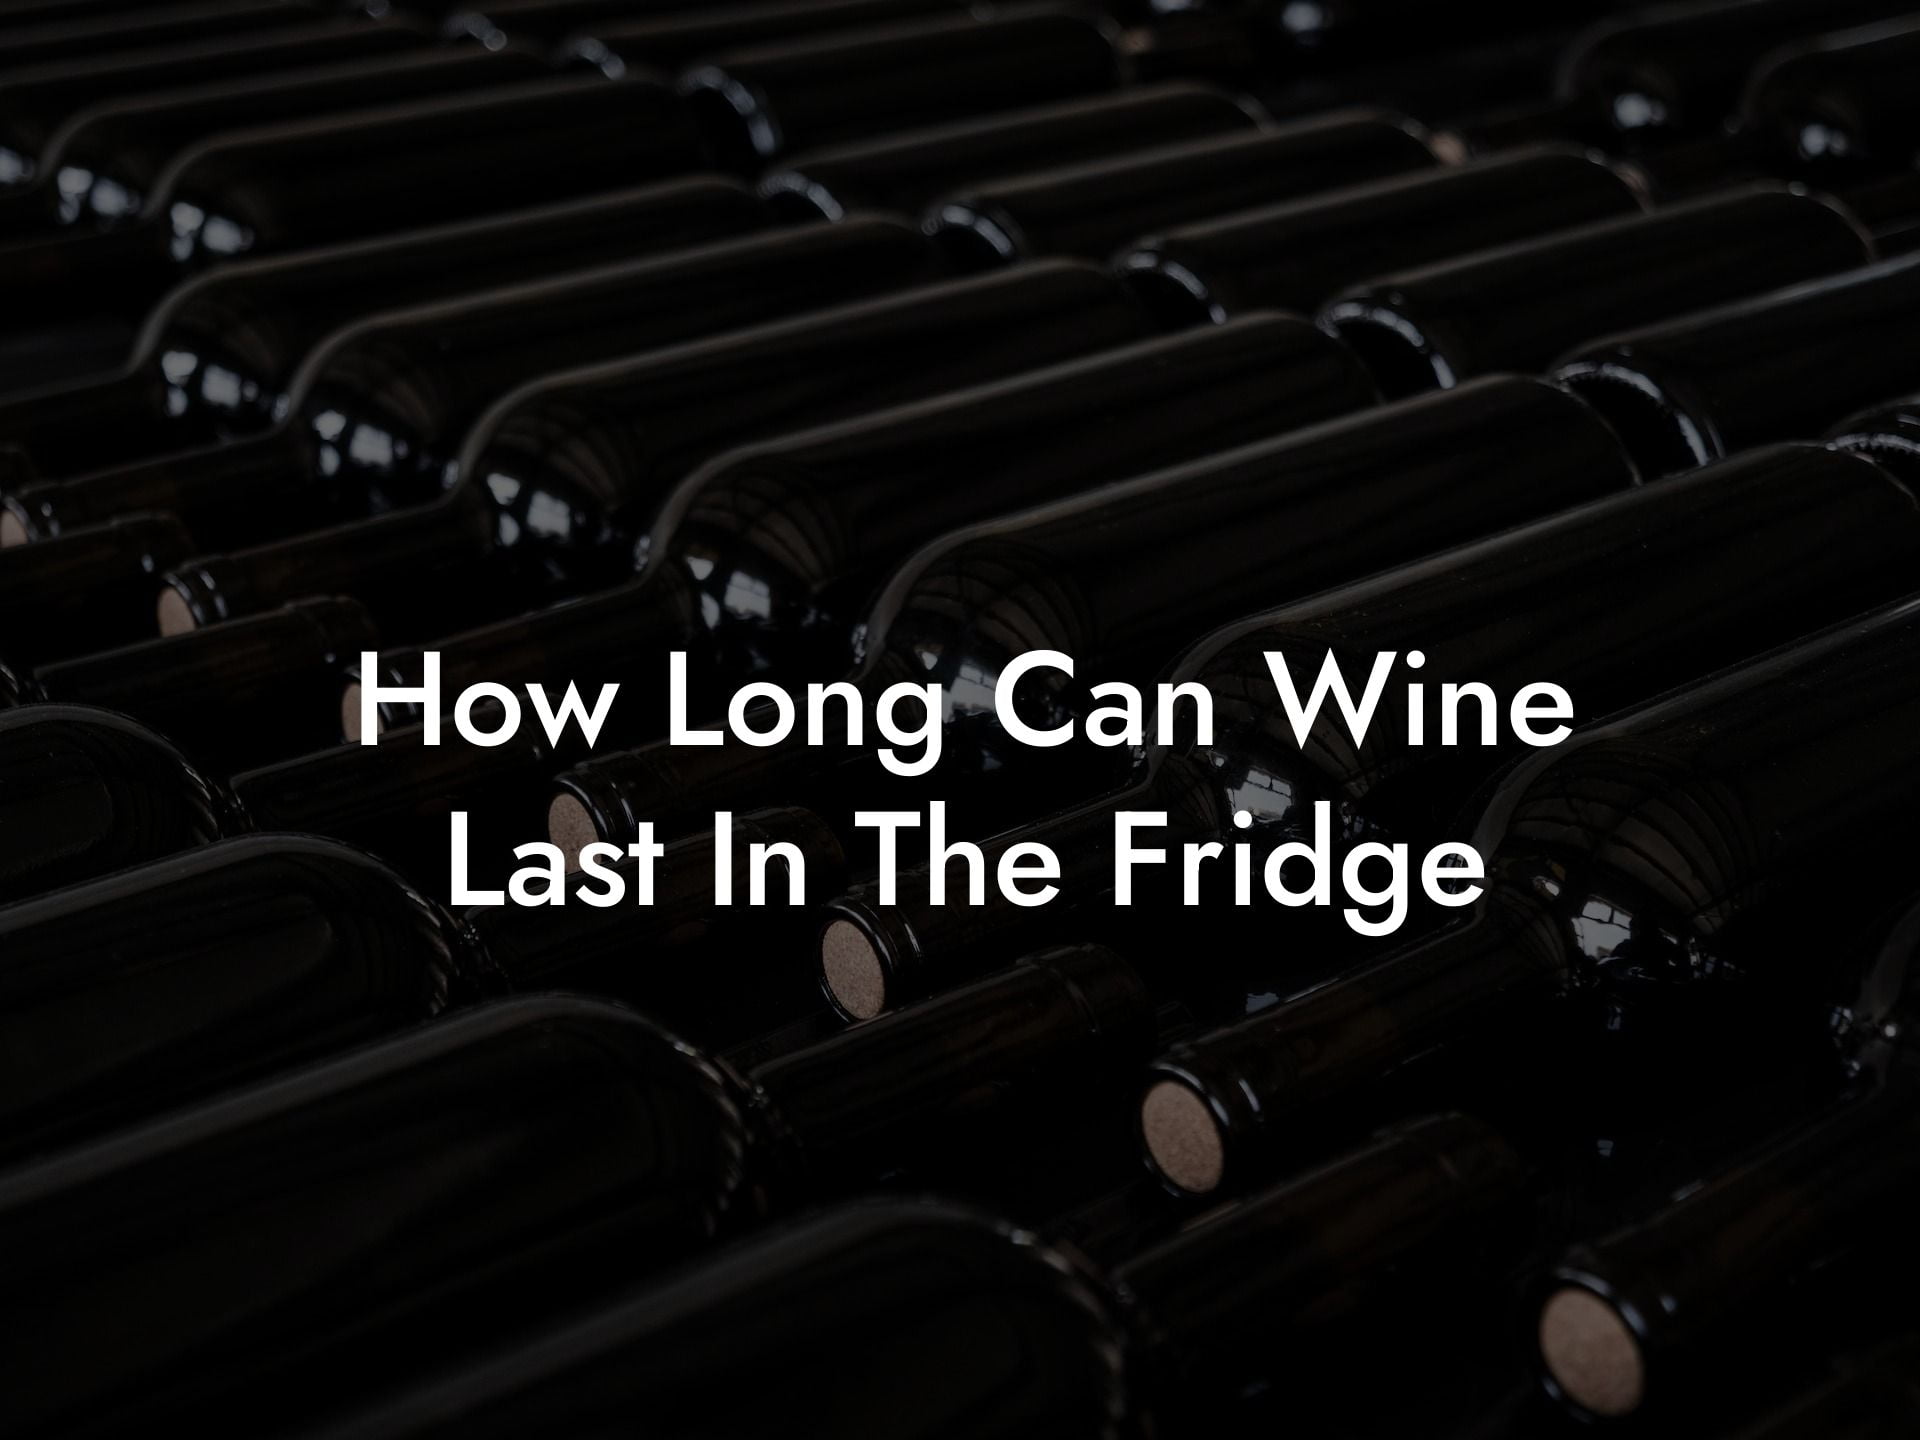 How Long Can Wine Last In The Fridge